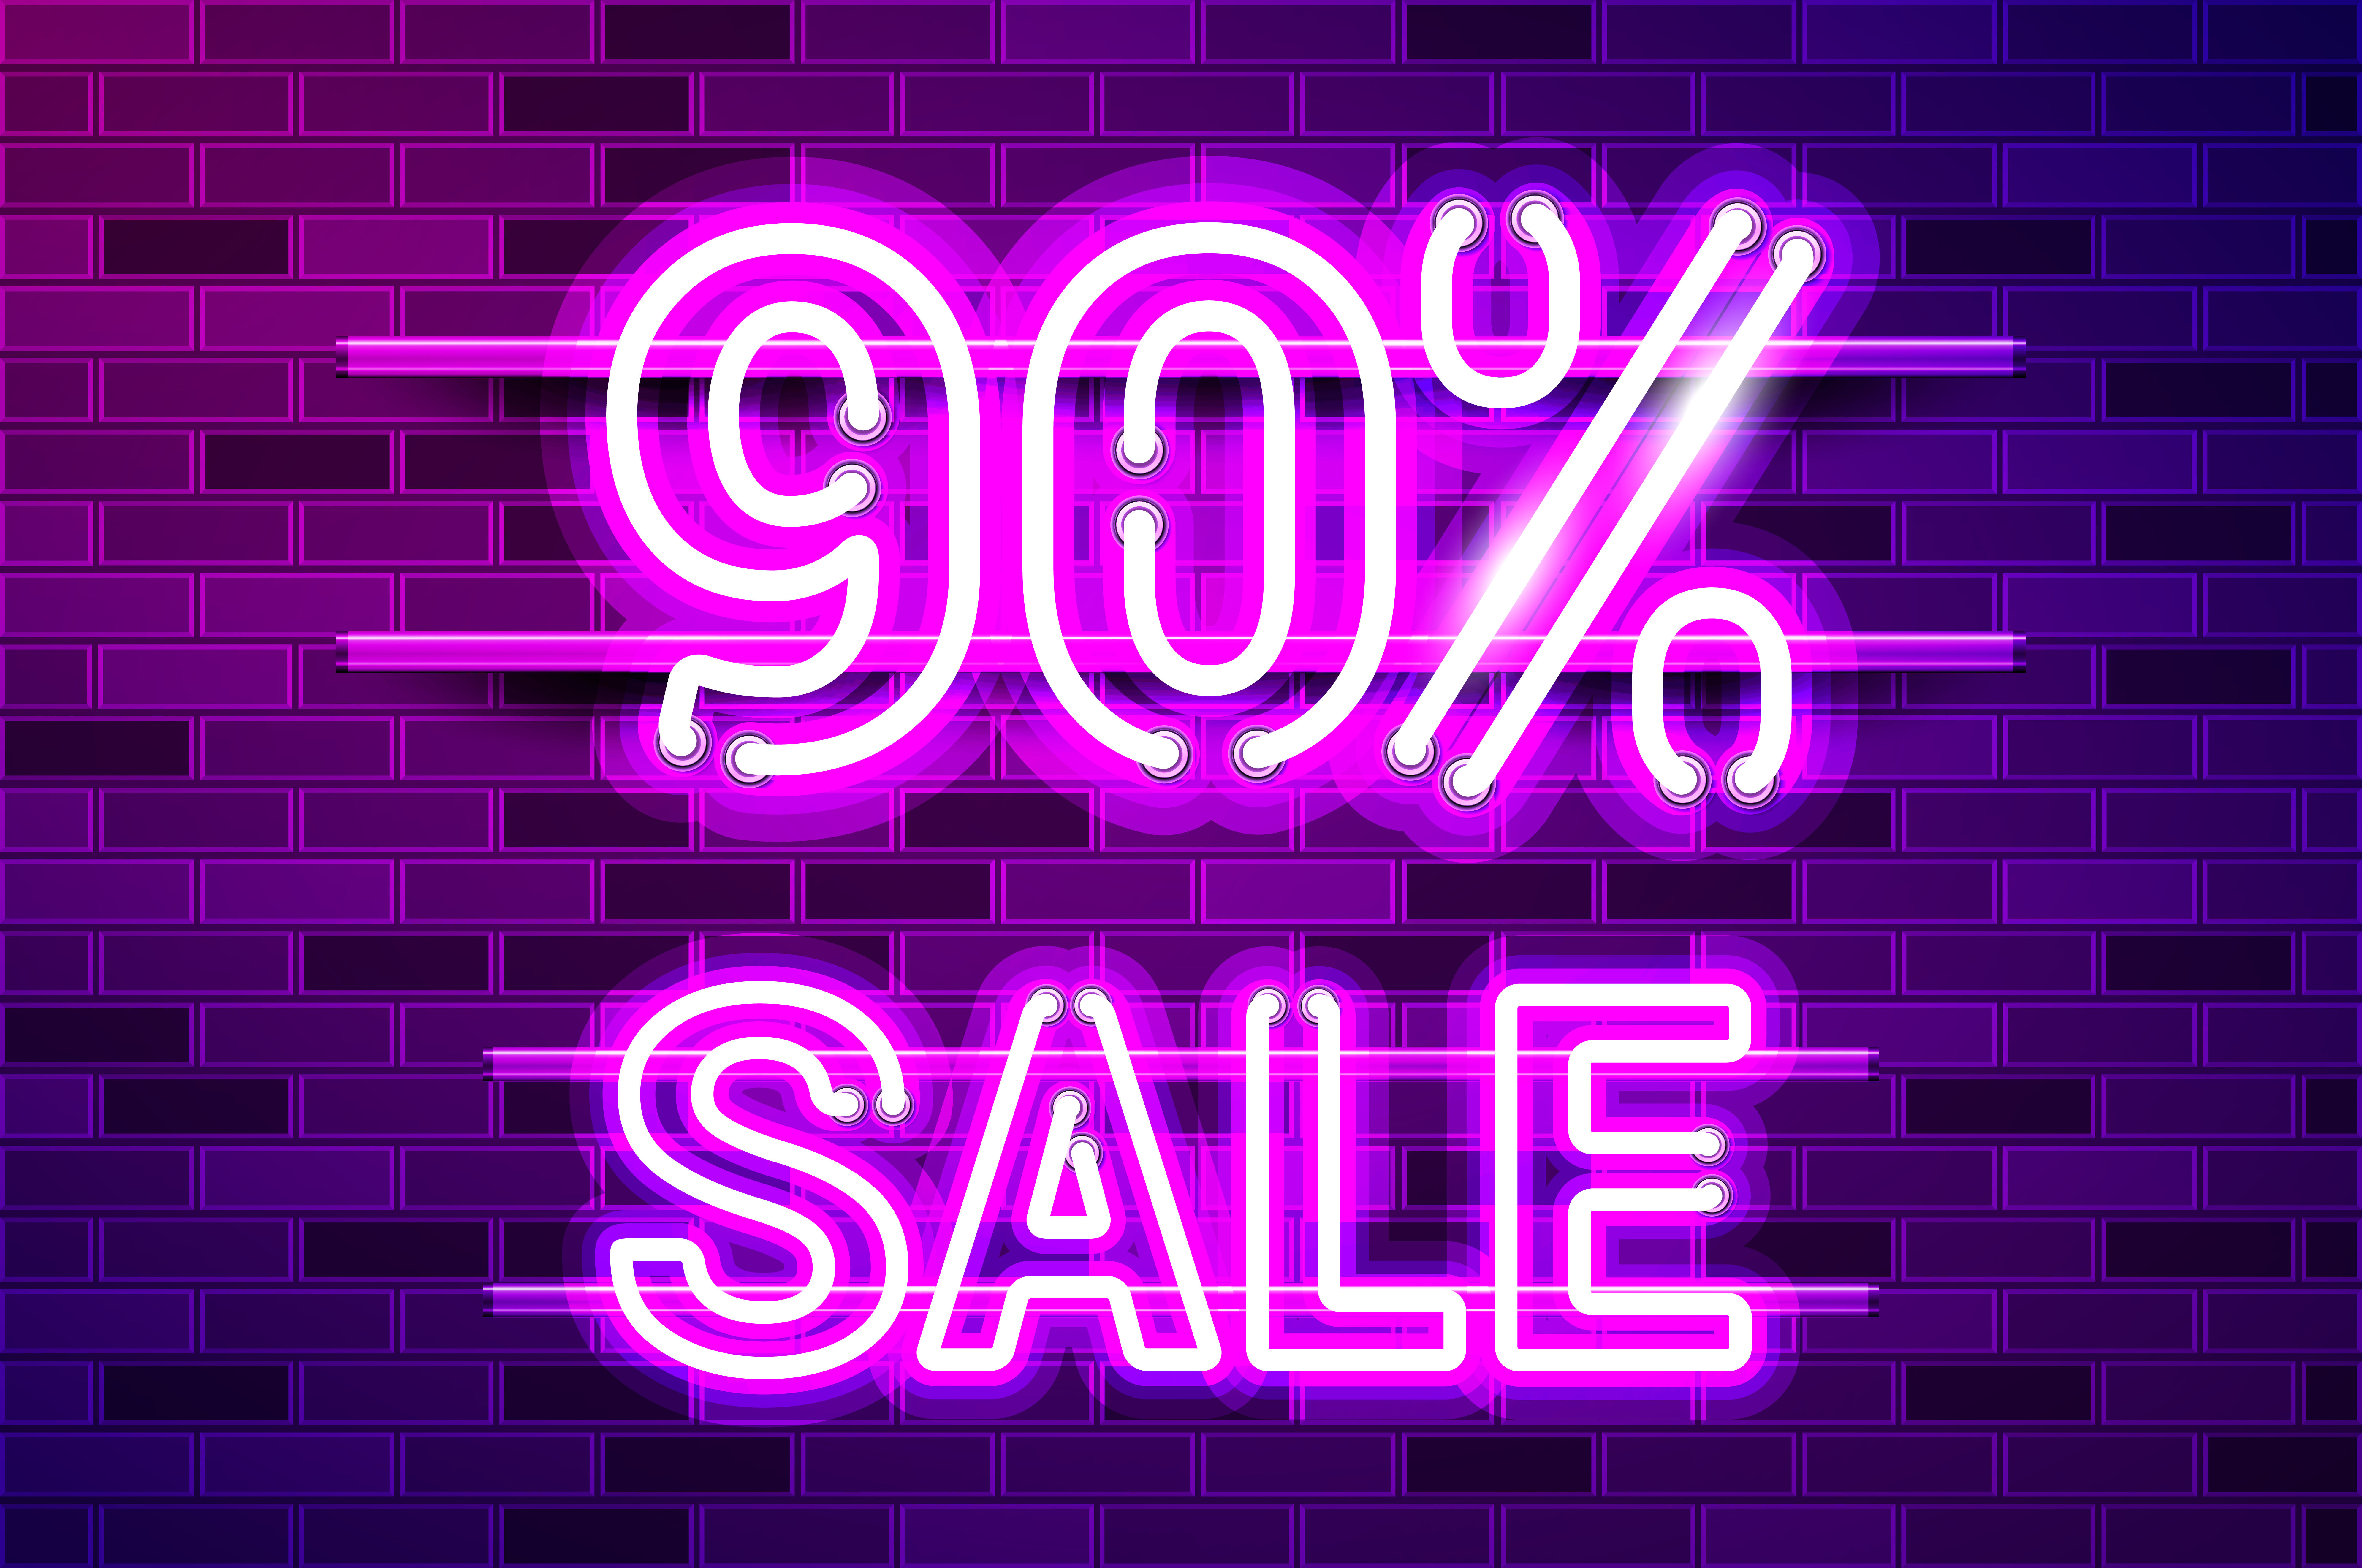 90 percent SALE glowing neon lamp sign. Realistic vector illustration. Purple brick wall, violet glow, metal holders.. 90 percent SALE glowing purple neon lamp sign